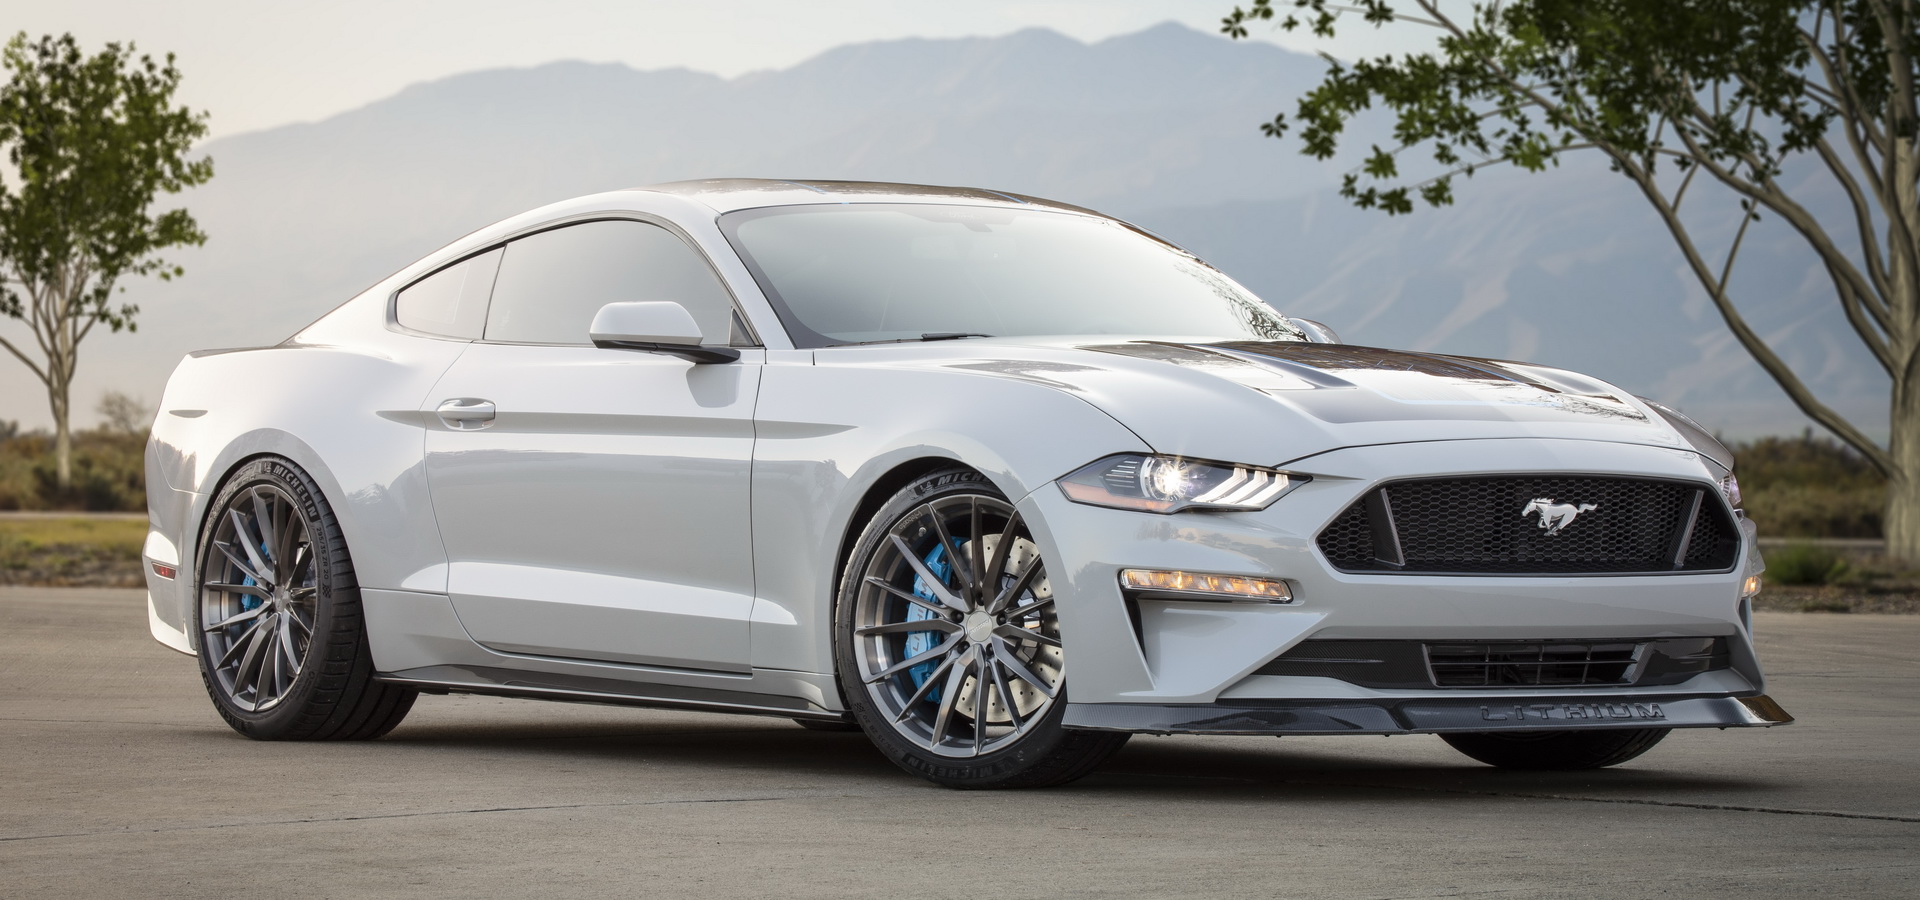 900 hp ford mustang ev has 6 speed manual 1000 lb ft of instant torque